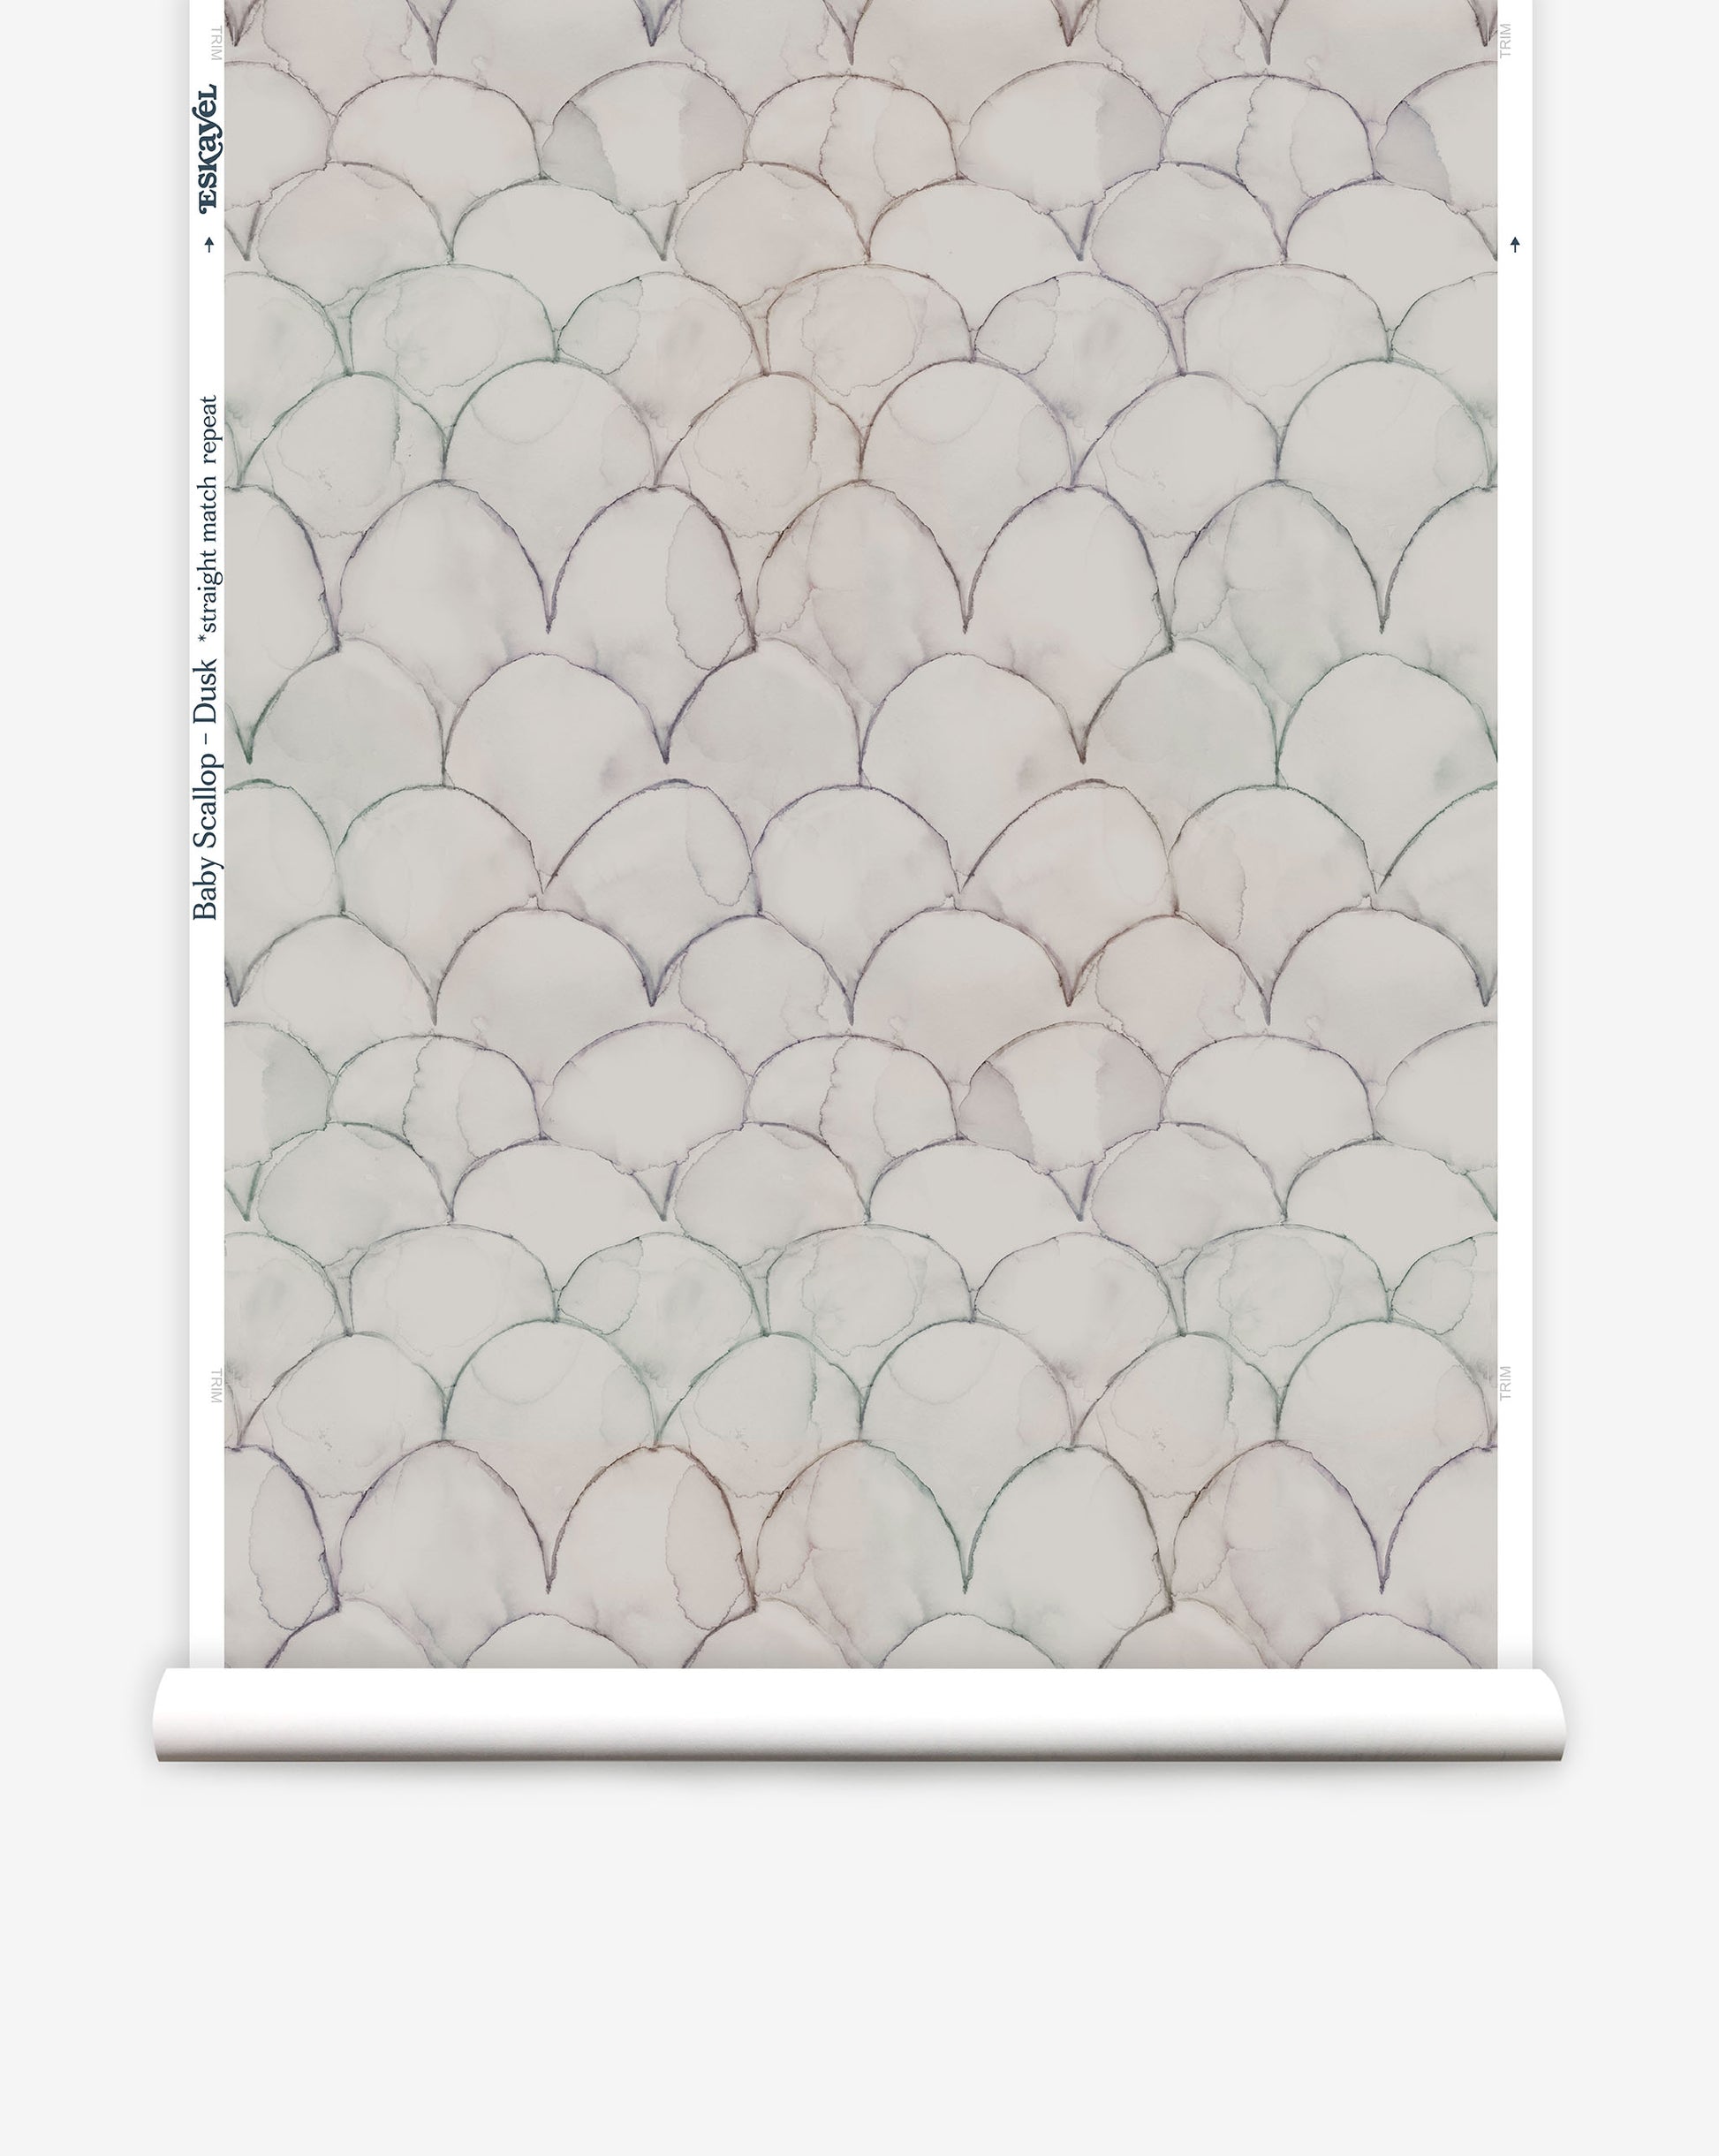 In Baby Scallops custom wallpaper in Dusk, neutrals meet hints of subtle color in a pattern of overlapping curves.